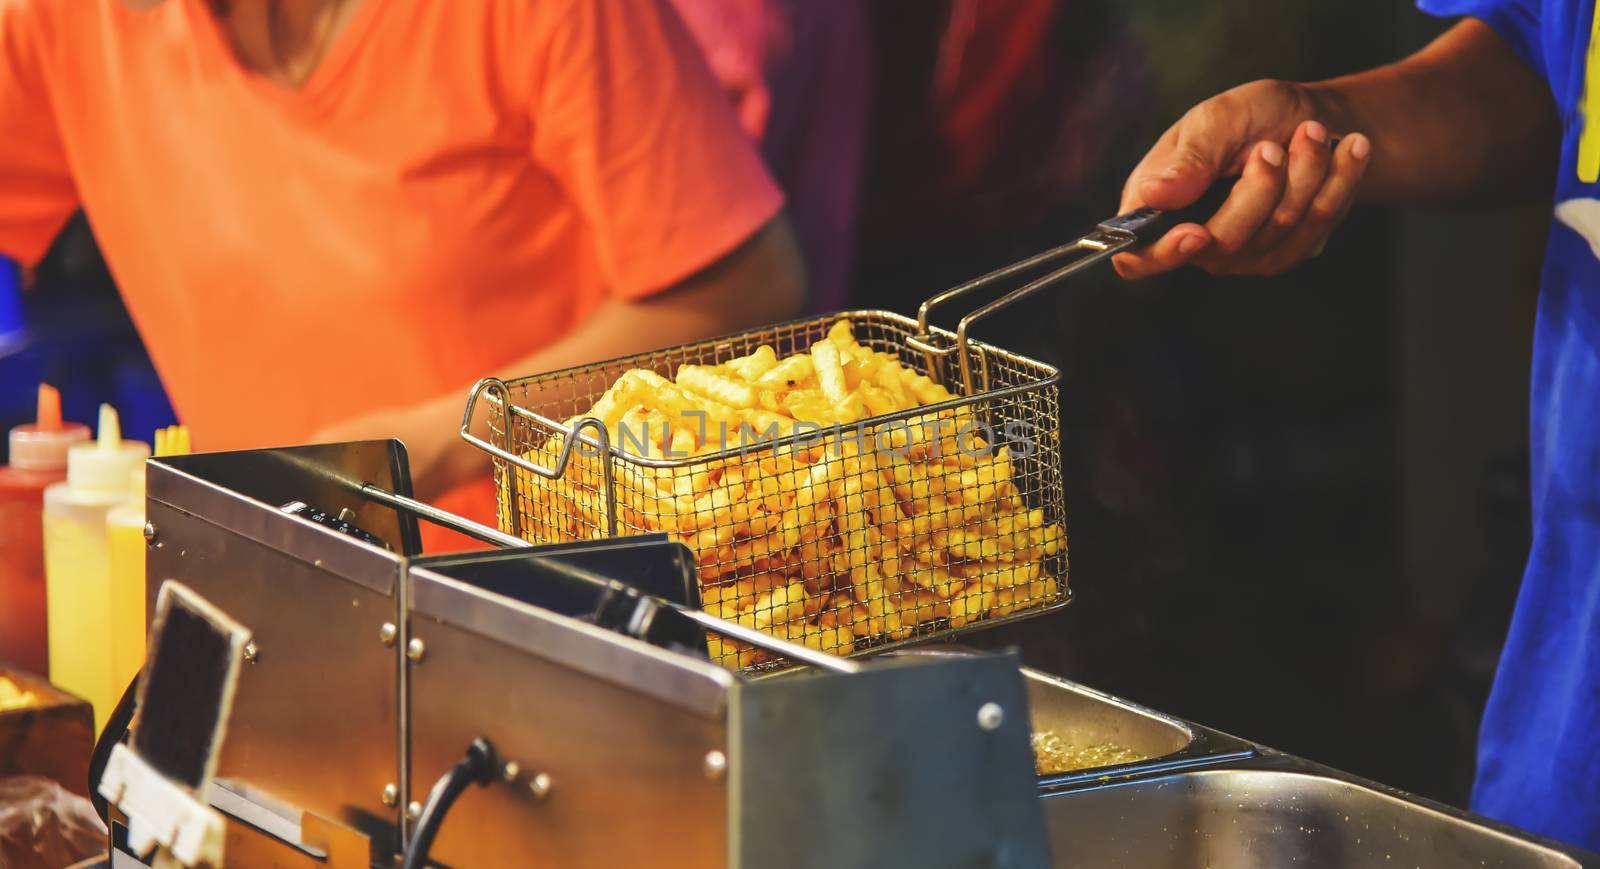 Employees frying french fries with hot oil. Selling food on the  by photobyphotoboy